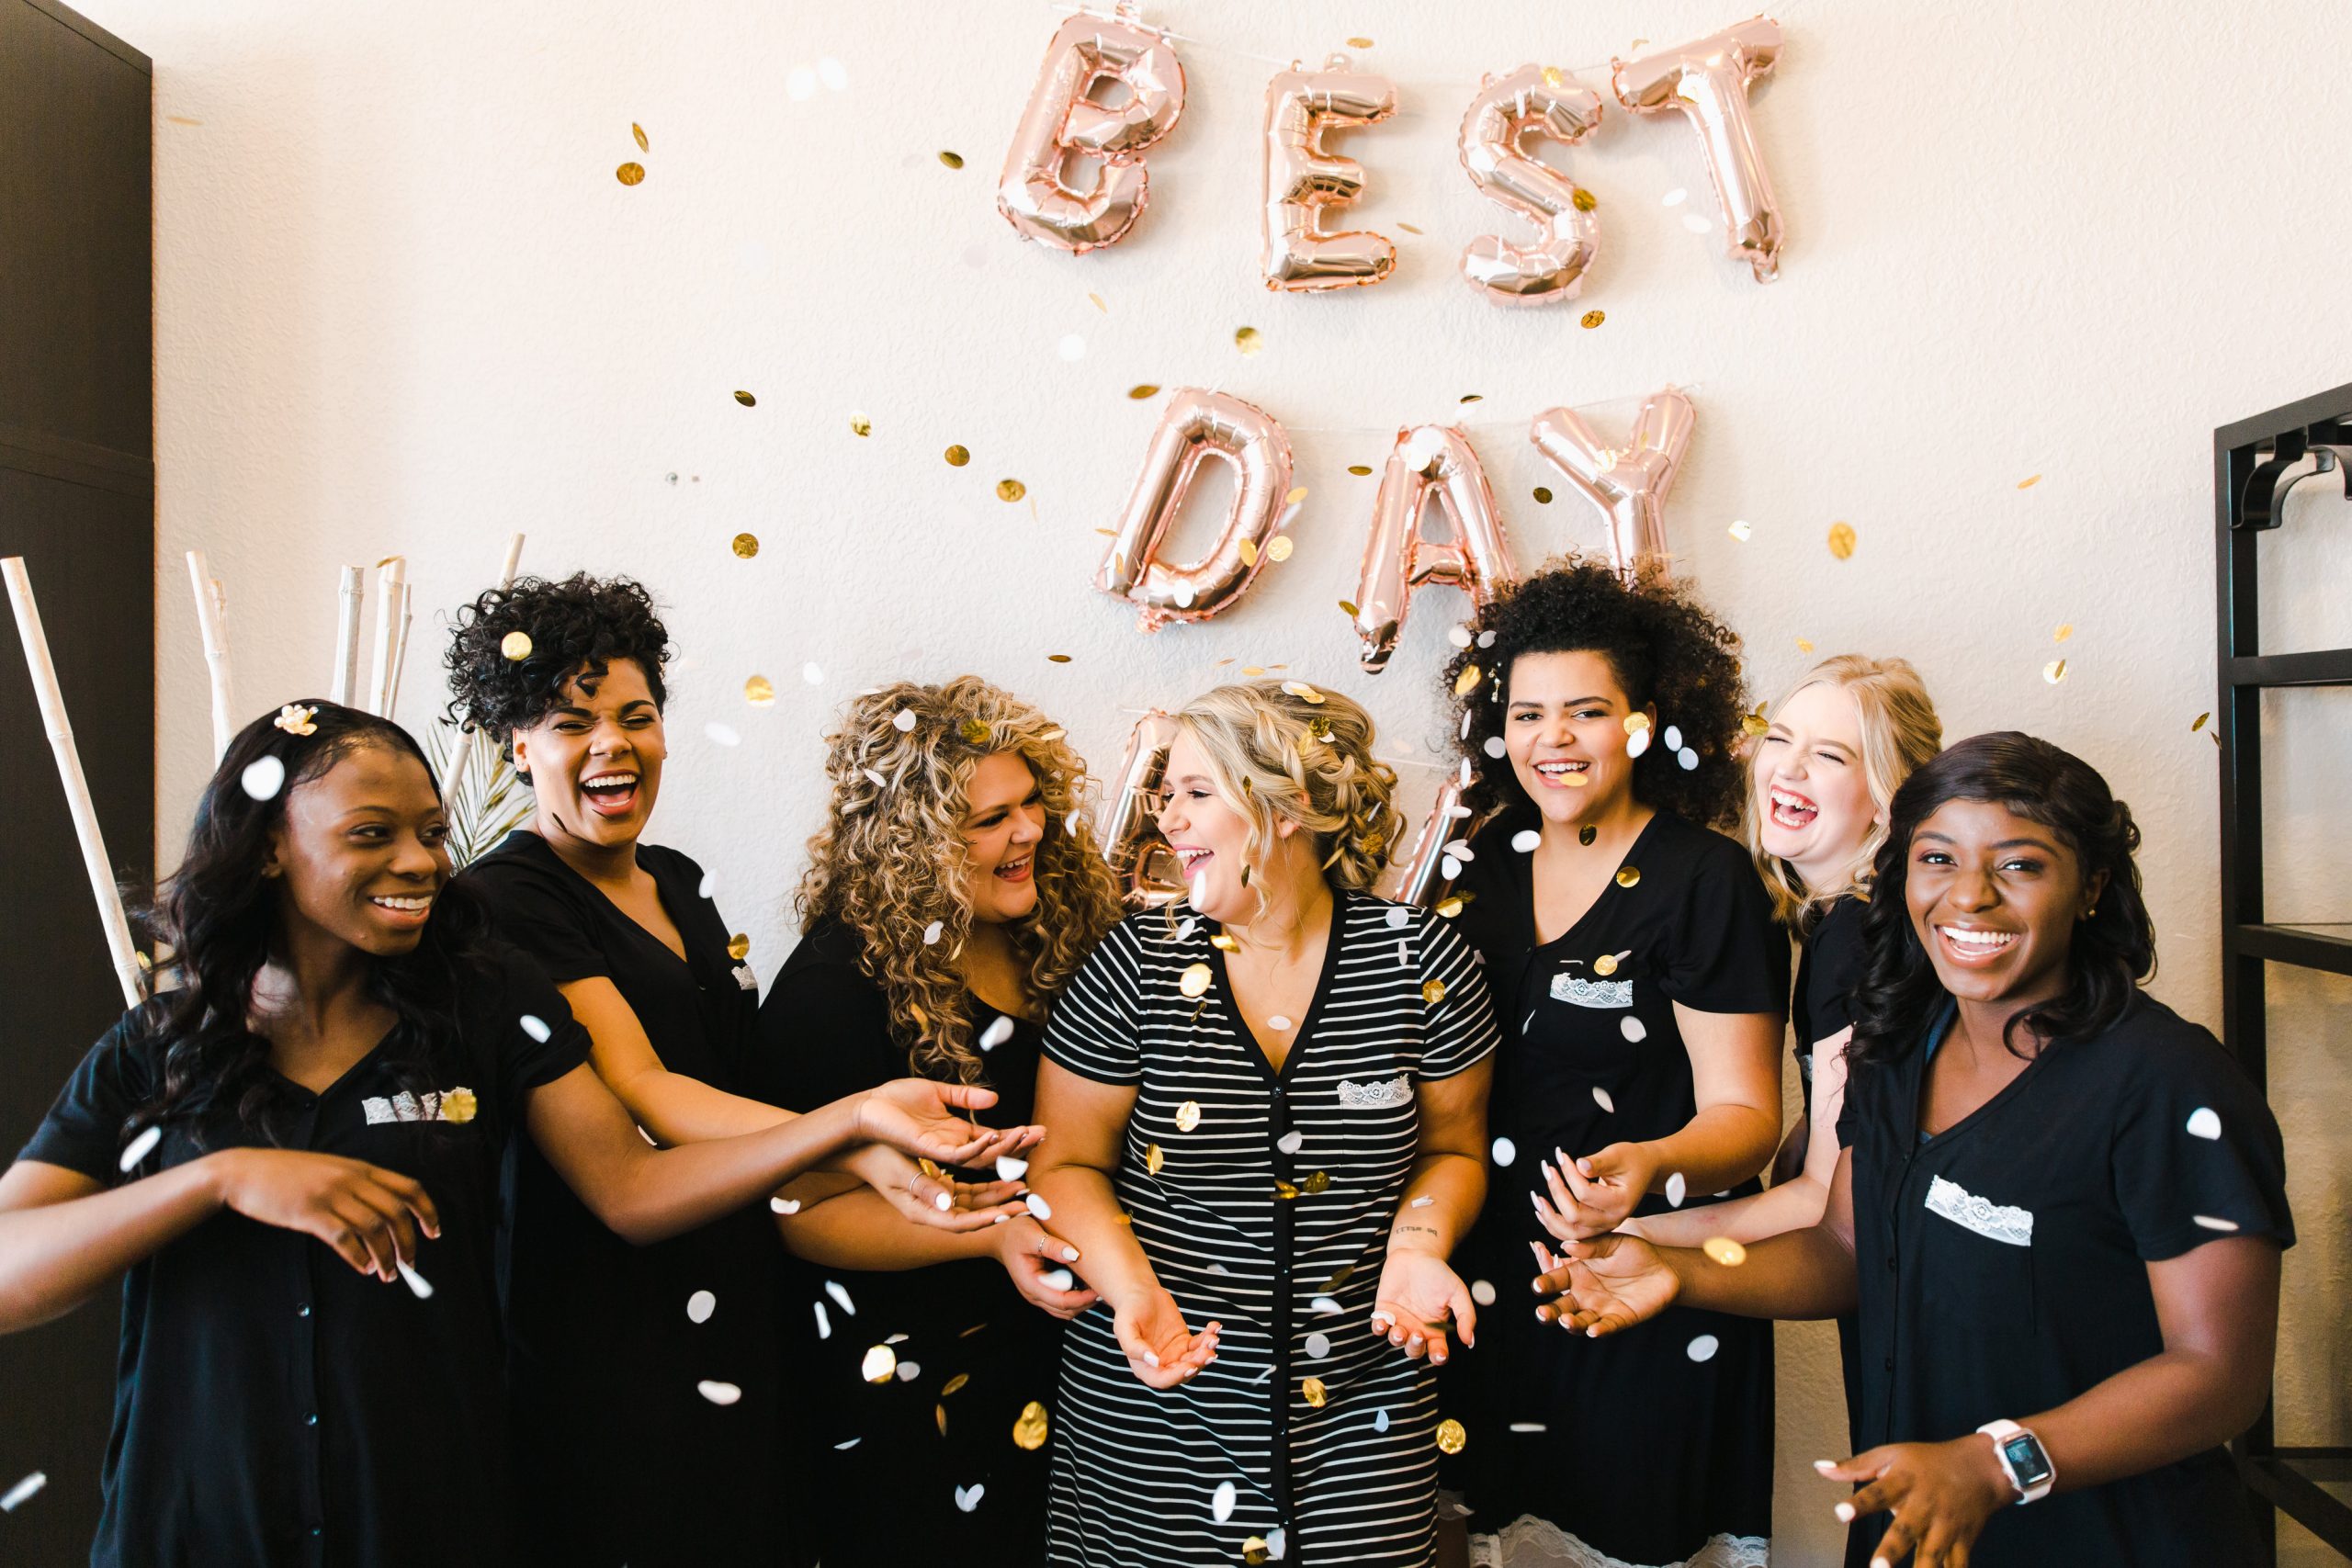 Simple Bridal Shower Ideas Blog Header Image With Bride Celebrating Her Wedding Day With Her Bridal Party